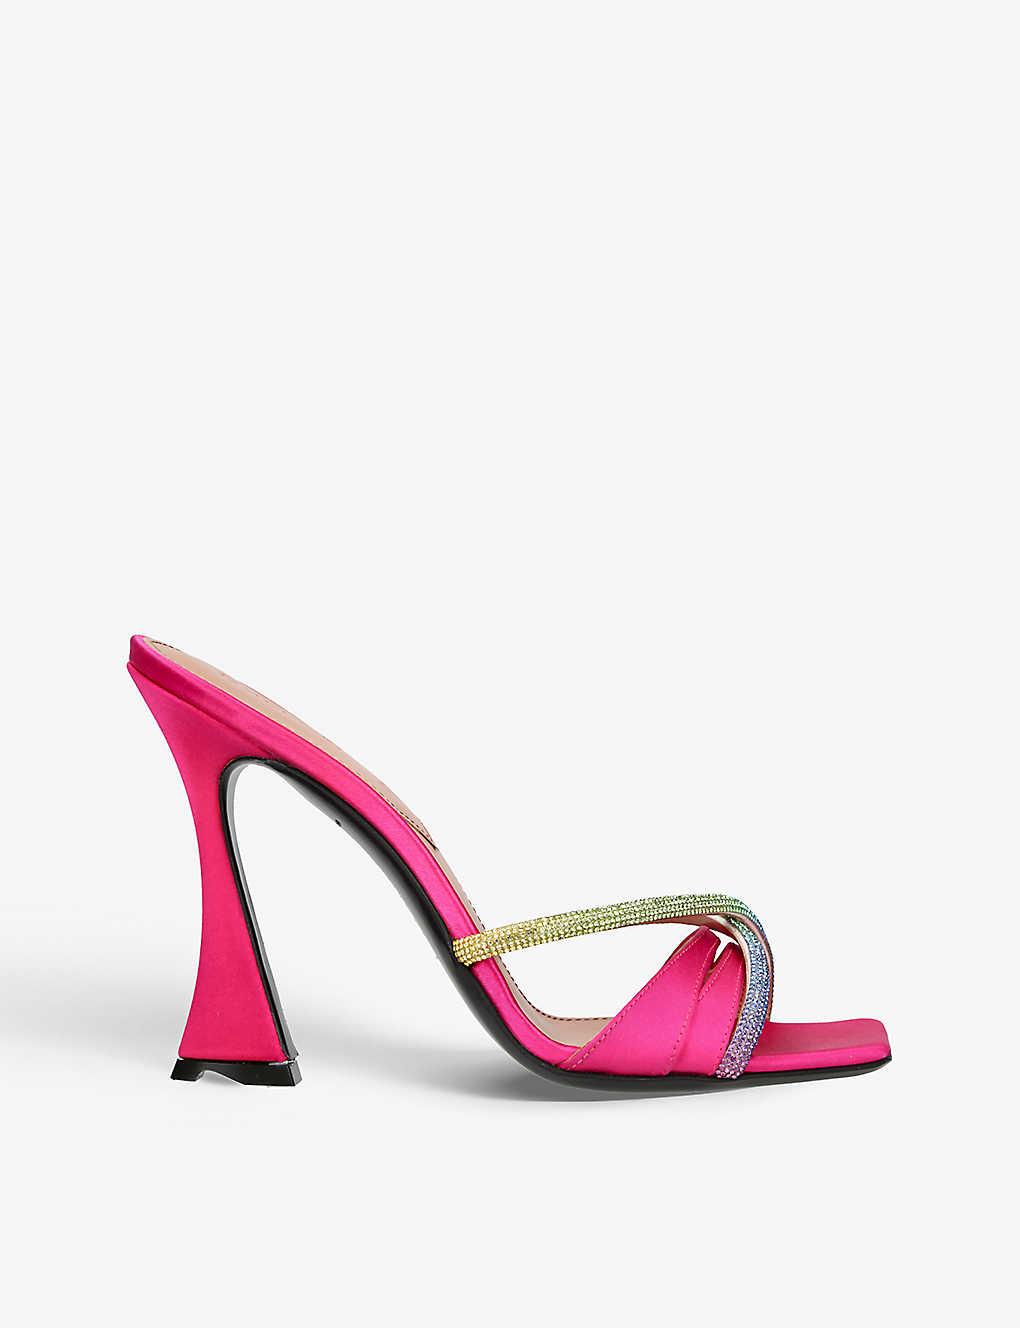 D'Accori Lust Crystal-embellished Satin Heeled Mules in Pink | Lyst